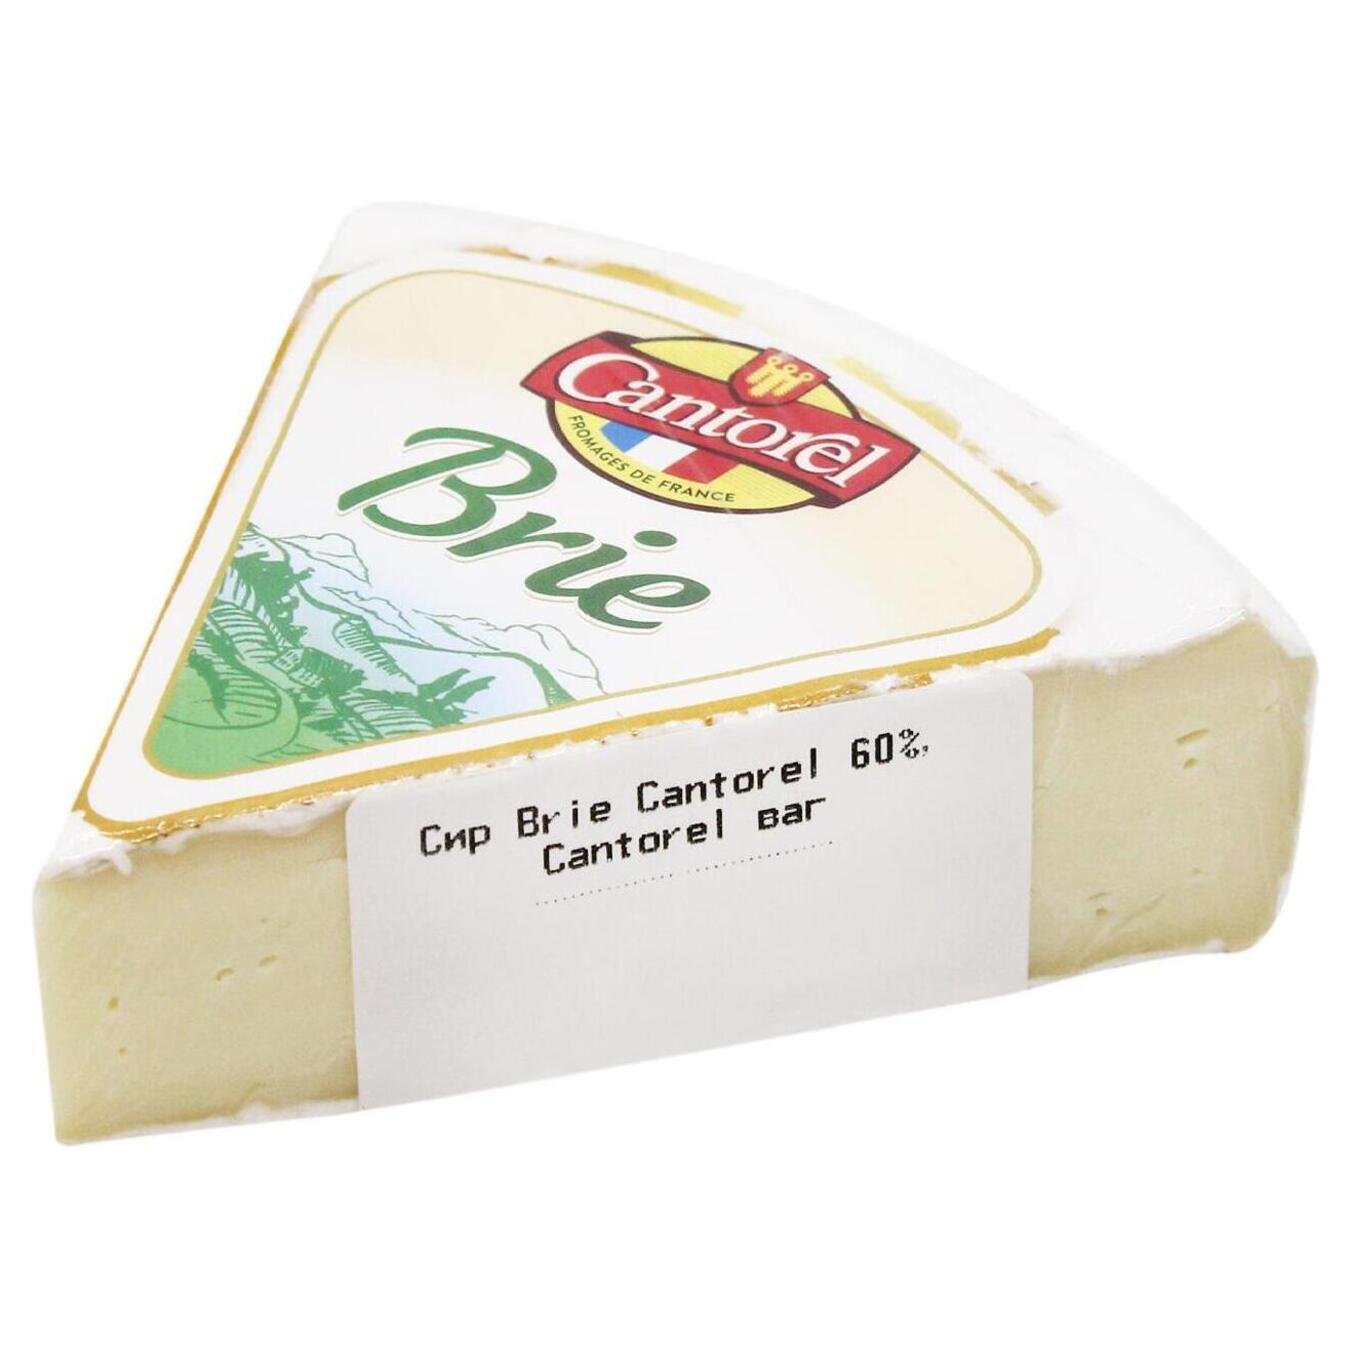 Cantorel Brie Cantorel cheese 60% wt